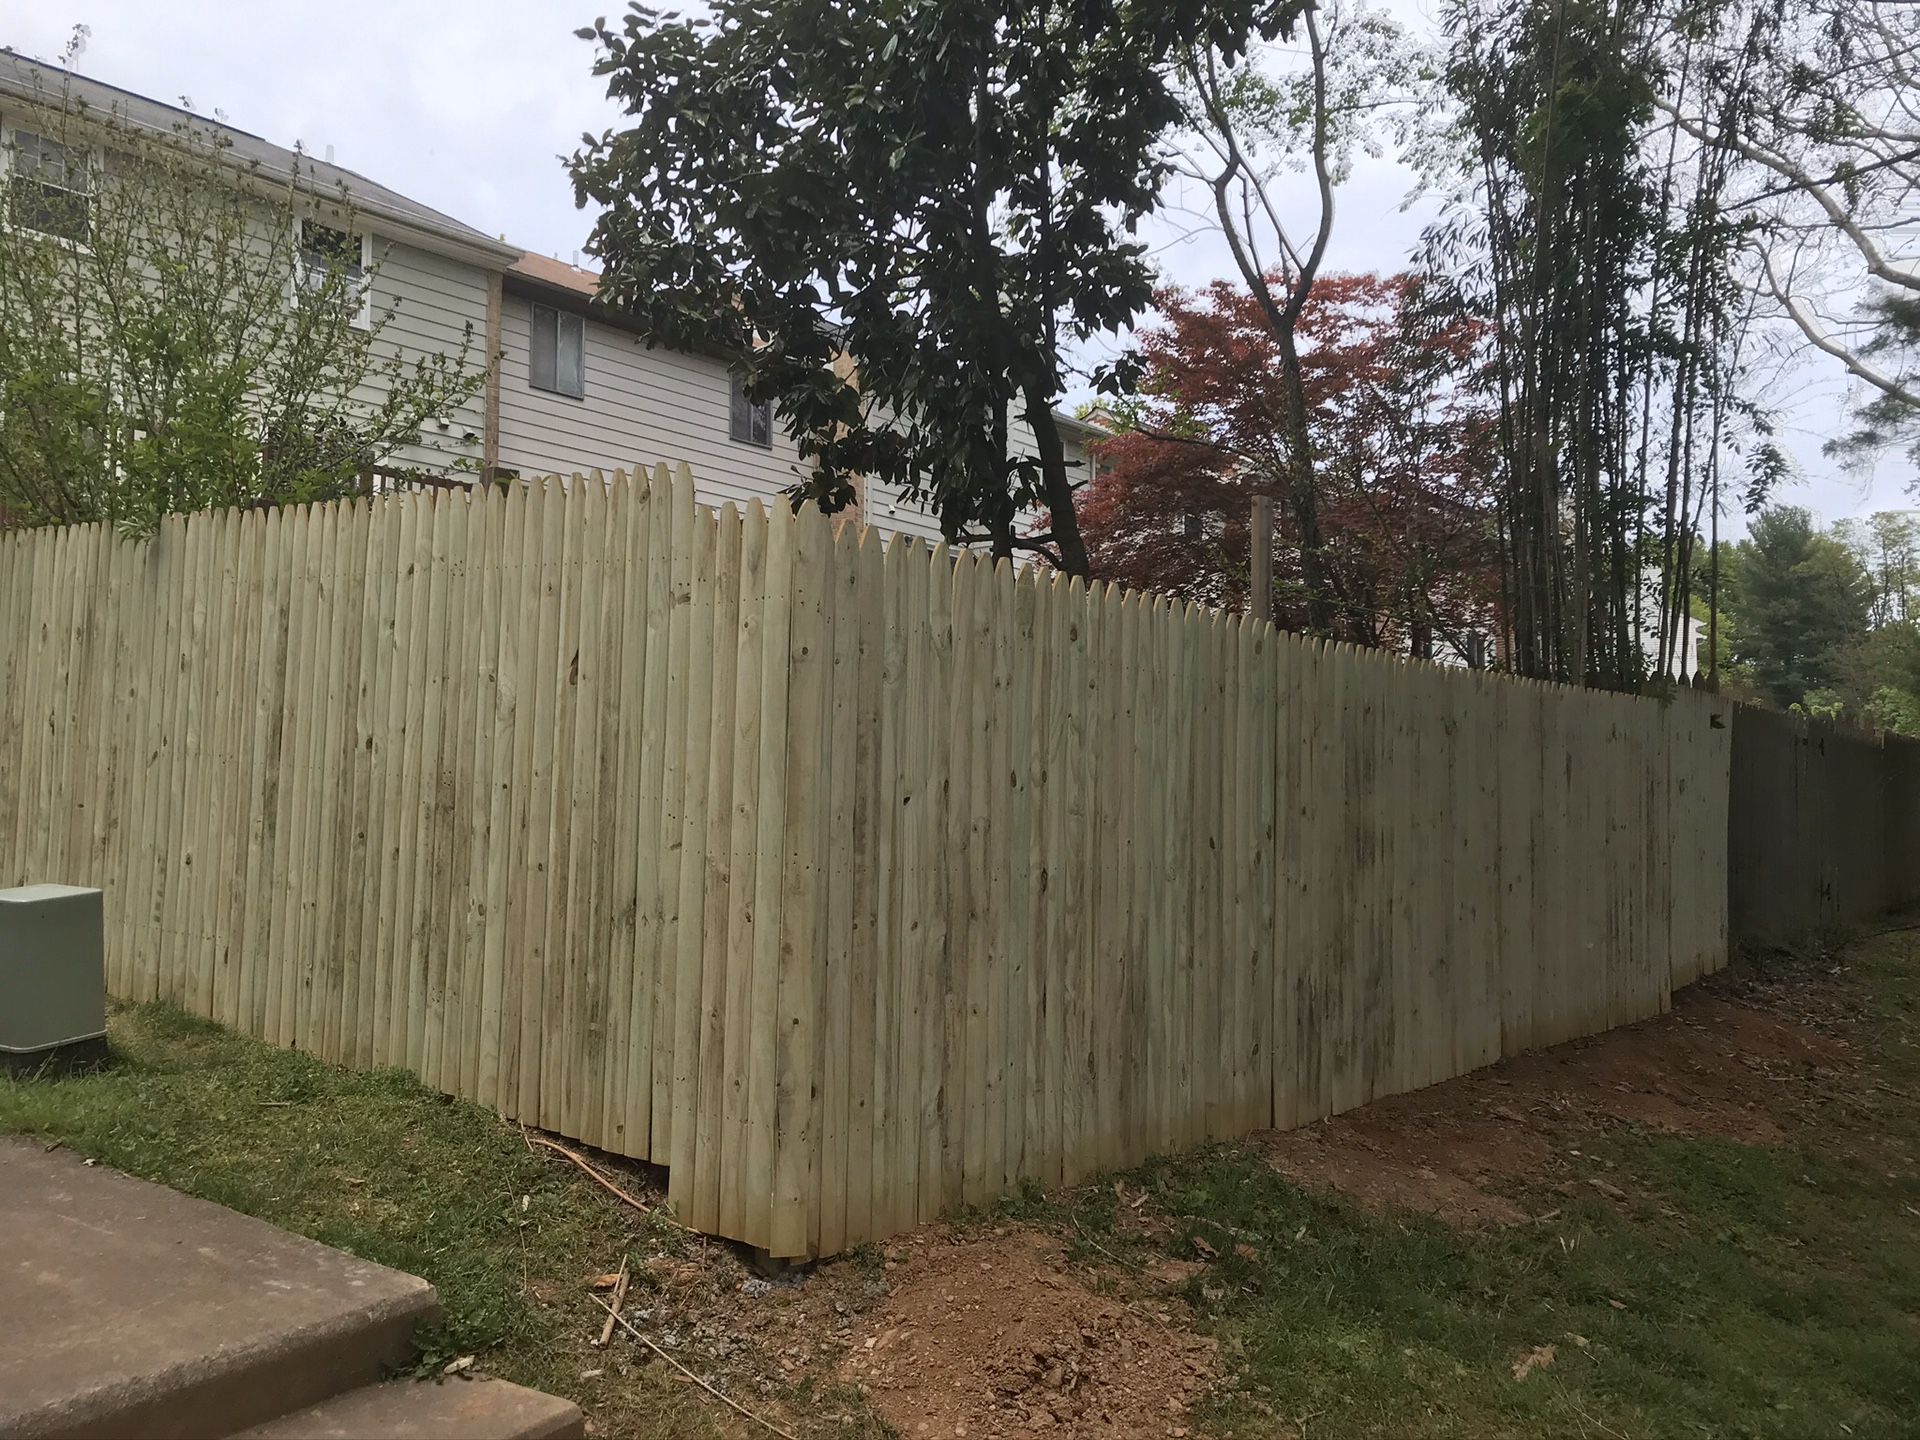 New deck and fence